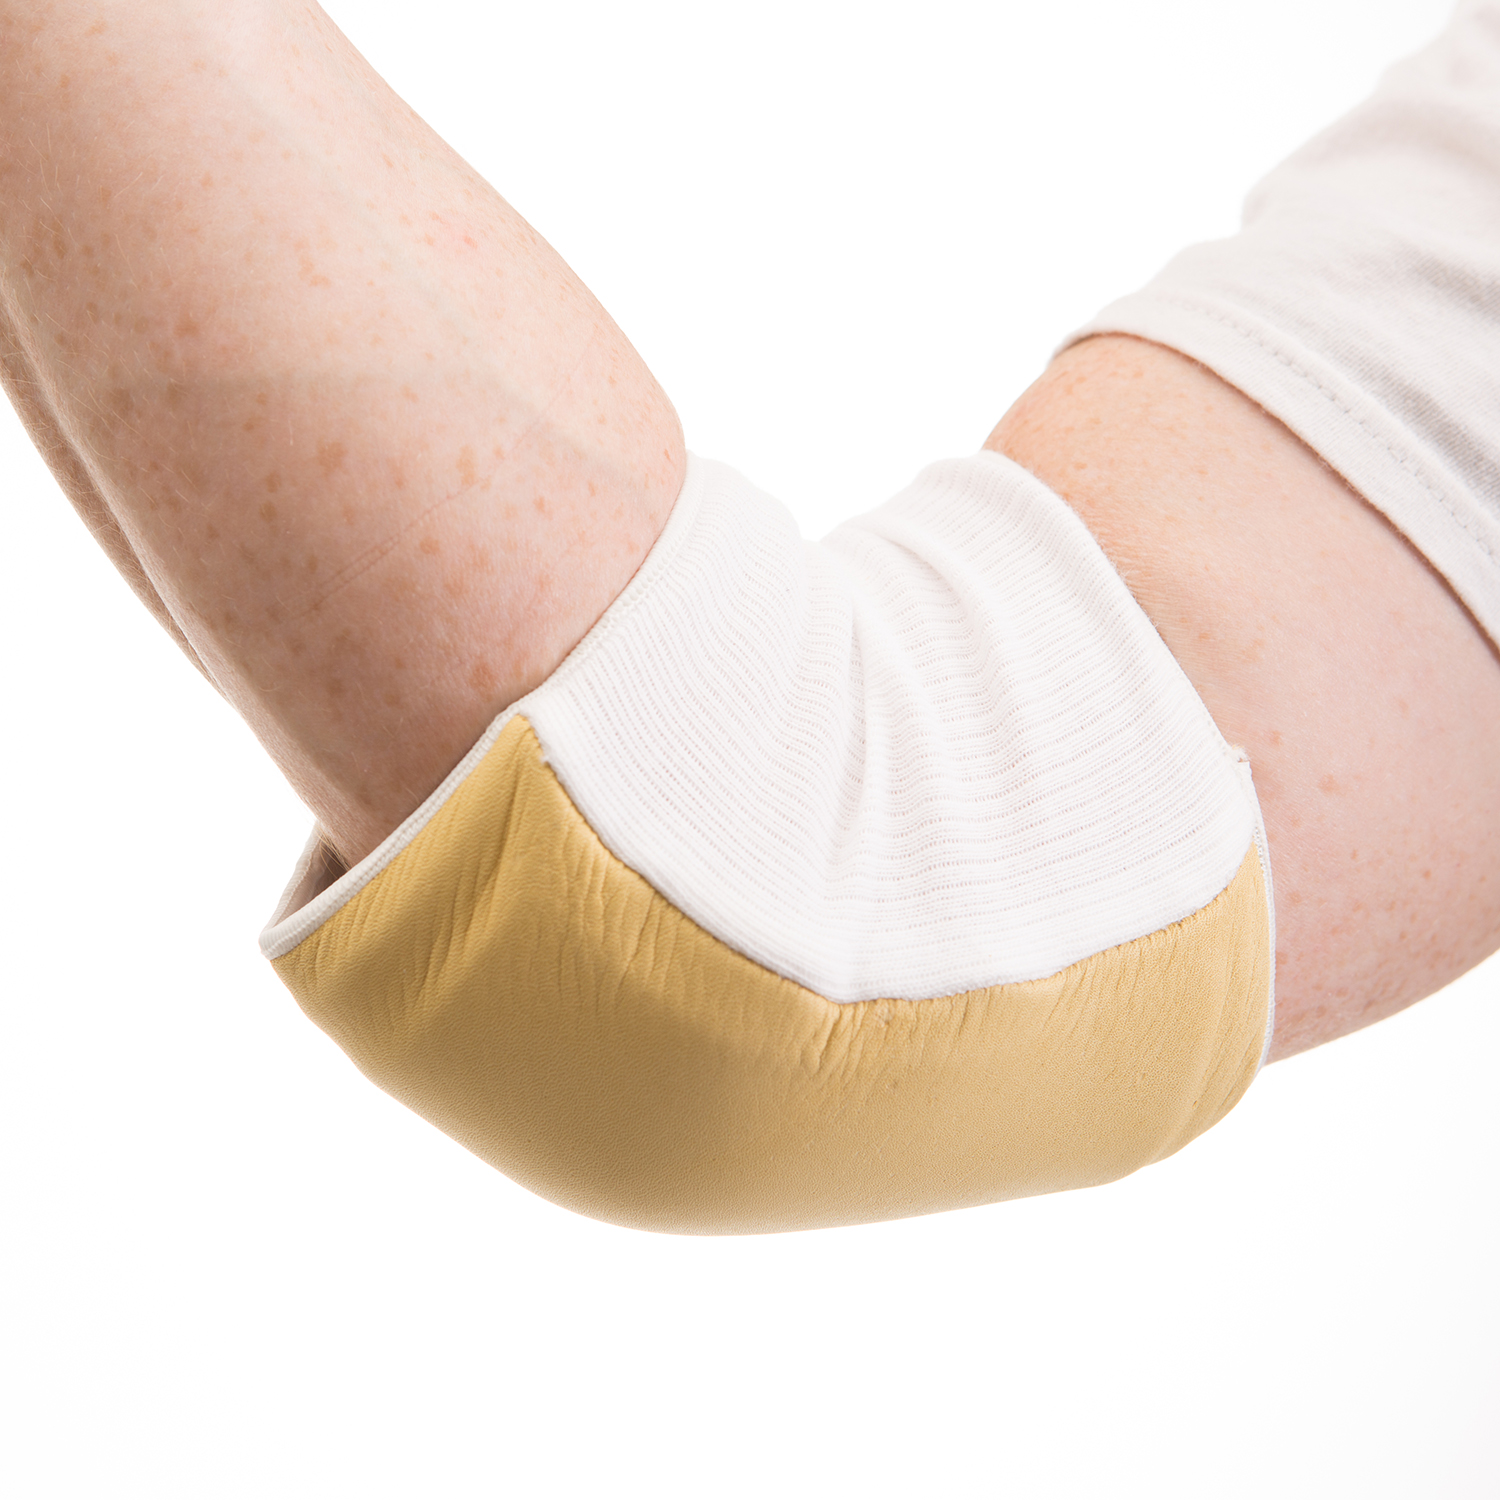 IMPACTO 806-20M ELBOW PAD IMPACT SUEDE PULL ON VEP FOAM